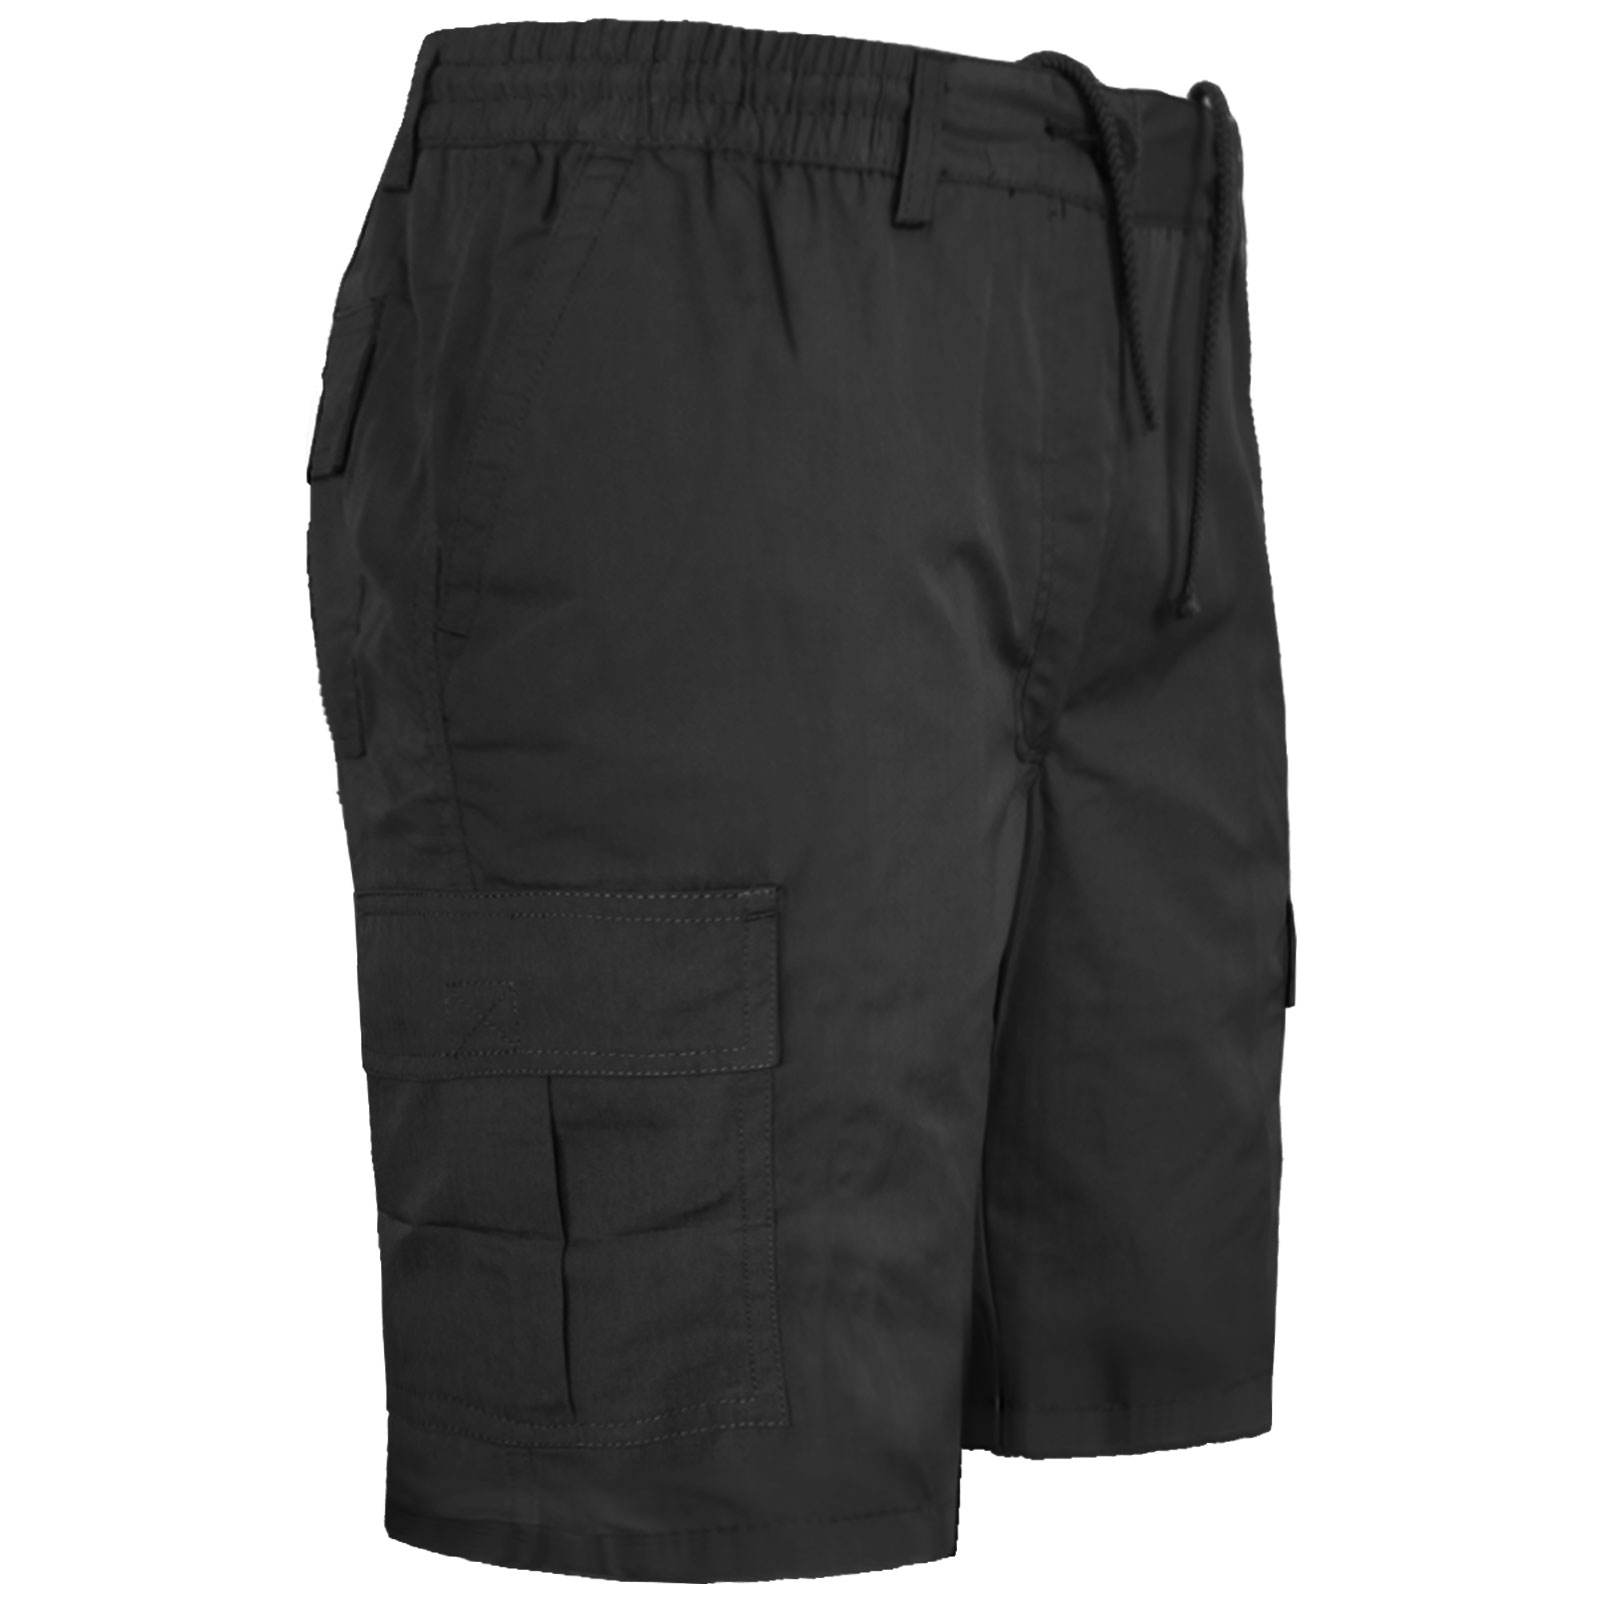 Work Shorts Walk Shorts Mens Classic Relaxed Fit Stretch Cargo Short Comfort Knee Length Flat Front Shorts with Pockets 